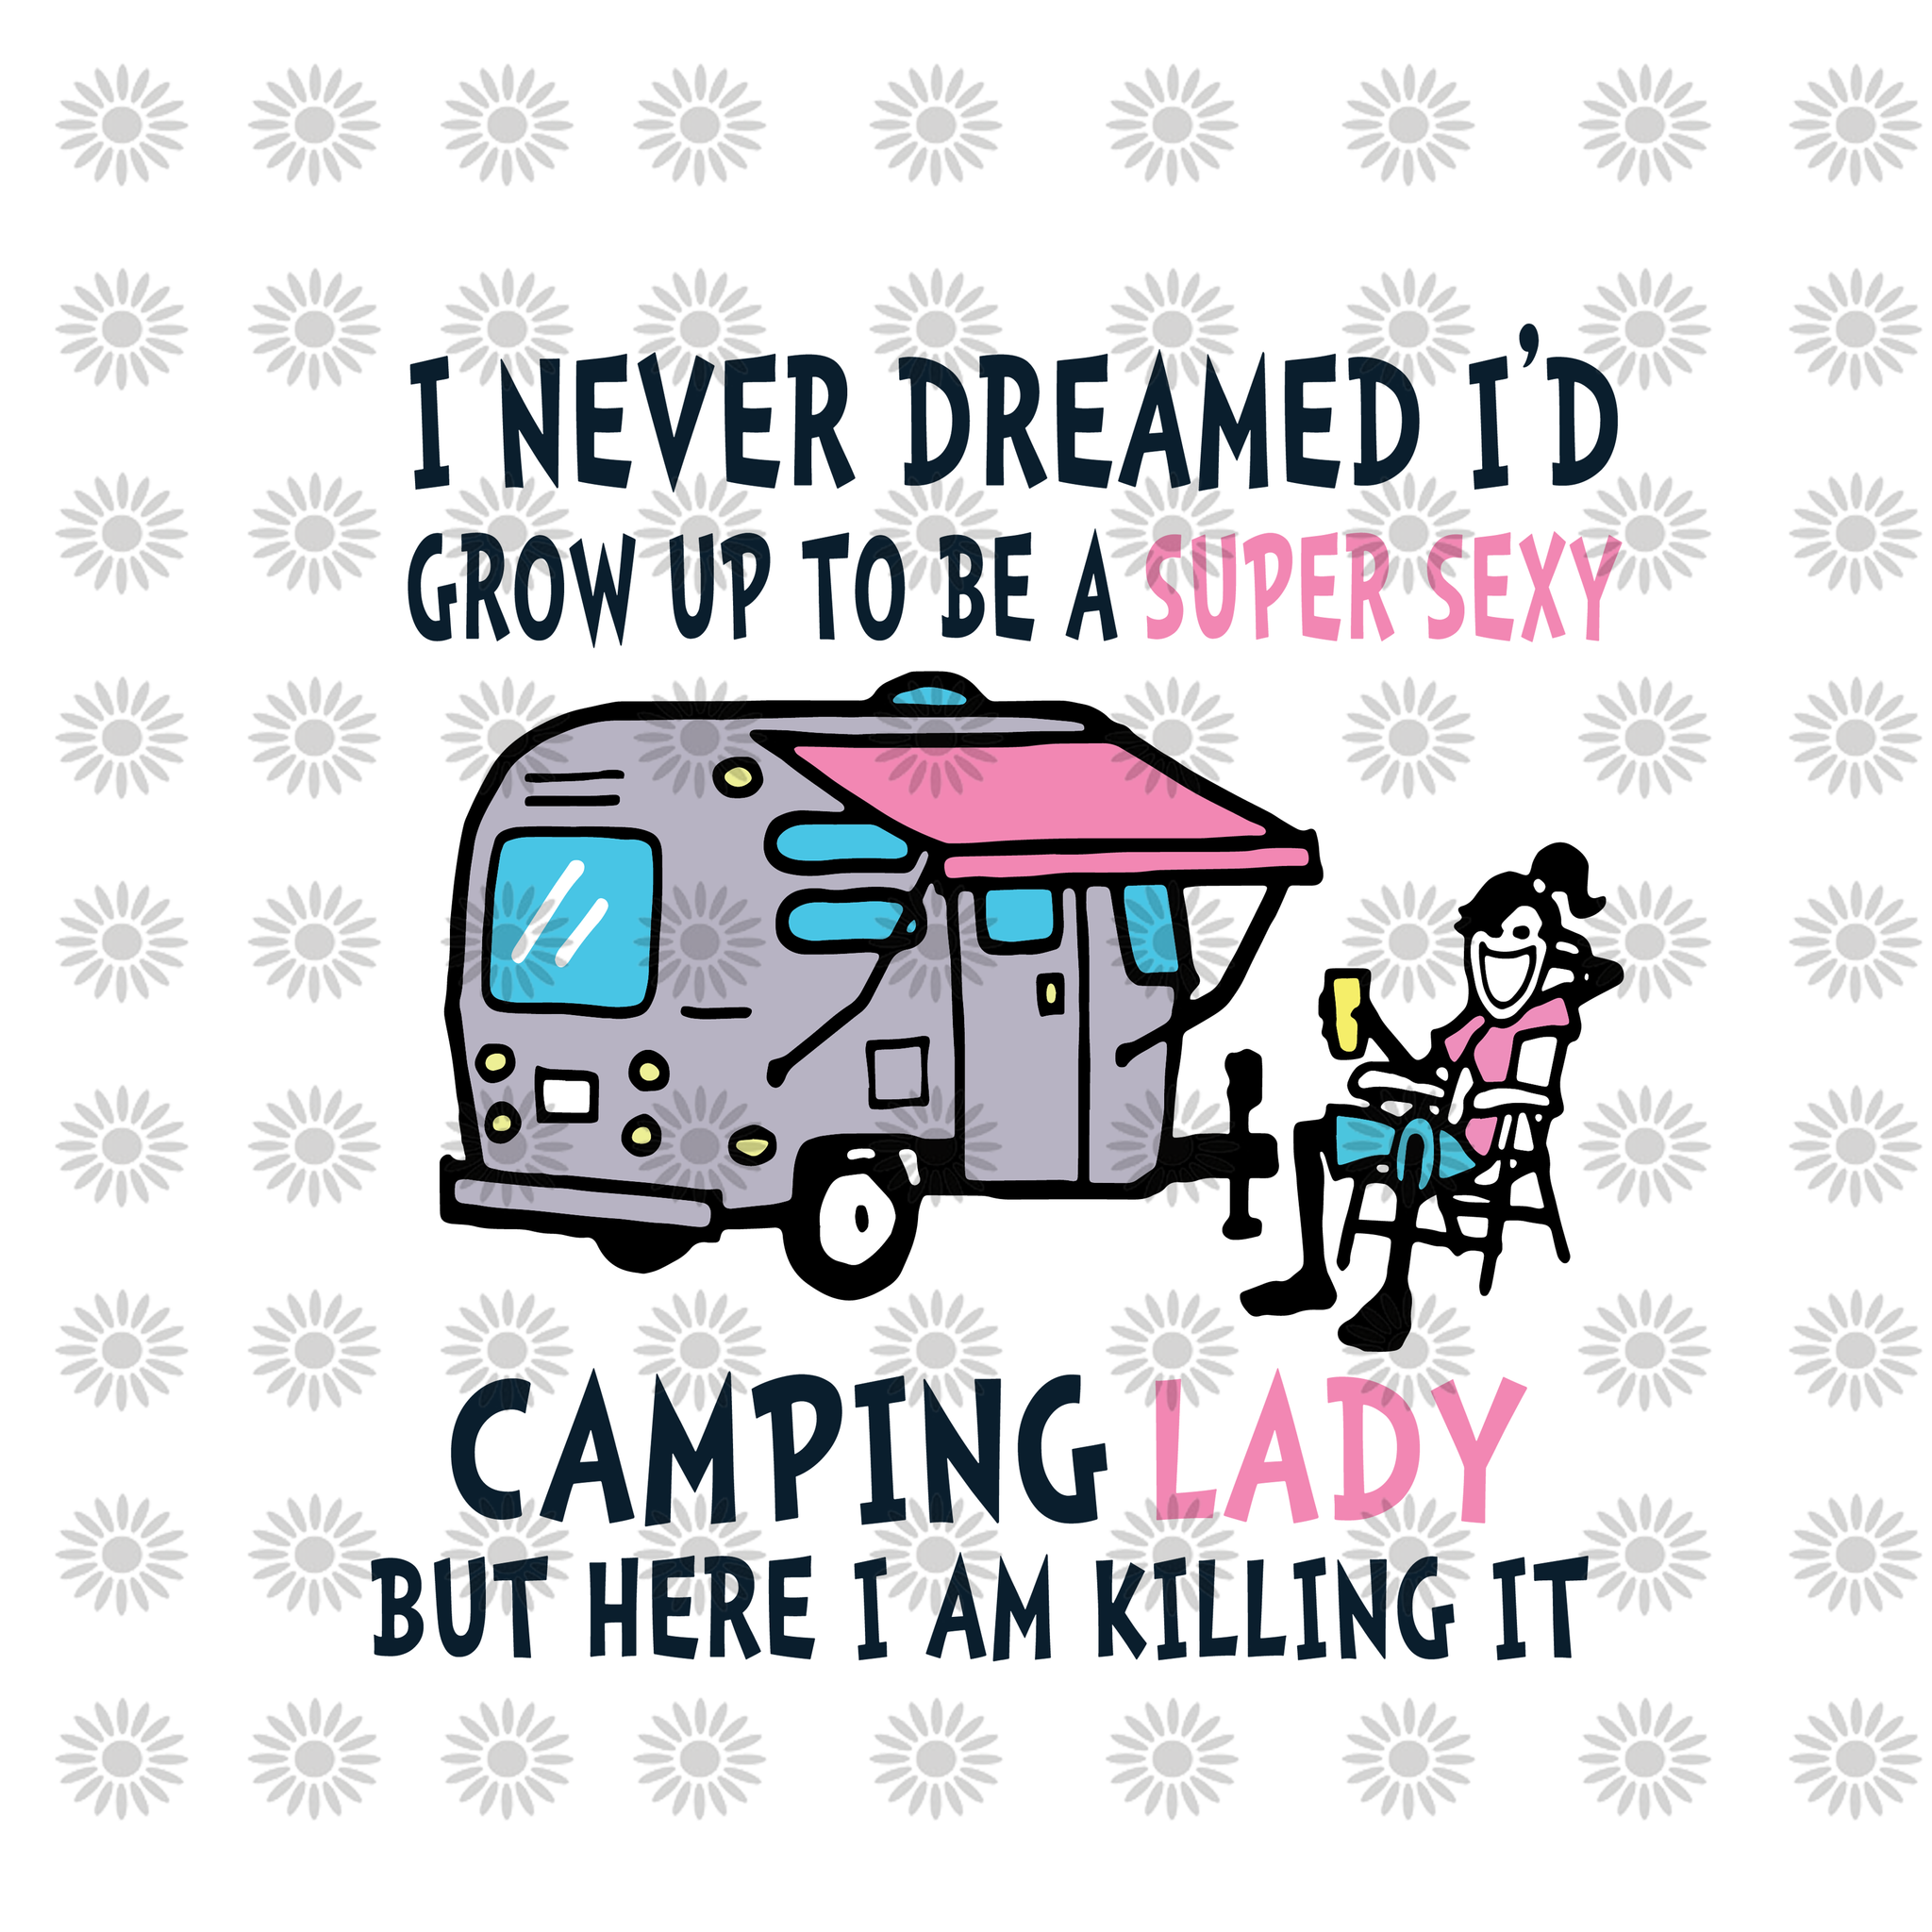 I Never Dreamed I'd Grow Up To Be A Super Sexy Camping Lady But Here I Am Killing It svg, png, dxf,eps file for Cricut, Silhouette